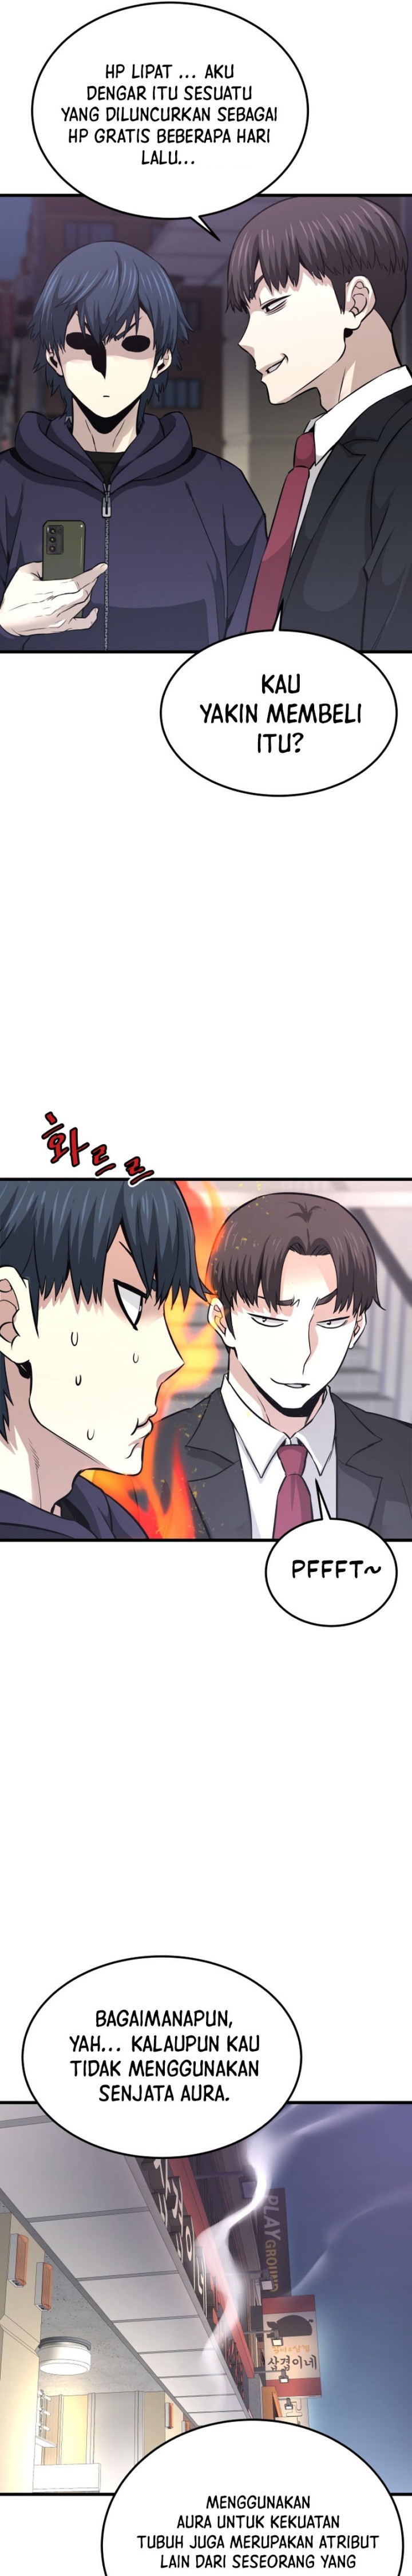 Han Dae Sung Returned From Hell Chapter 10 26